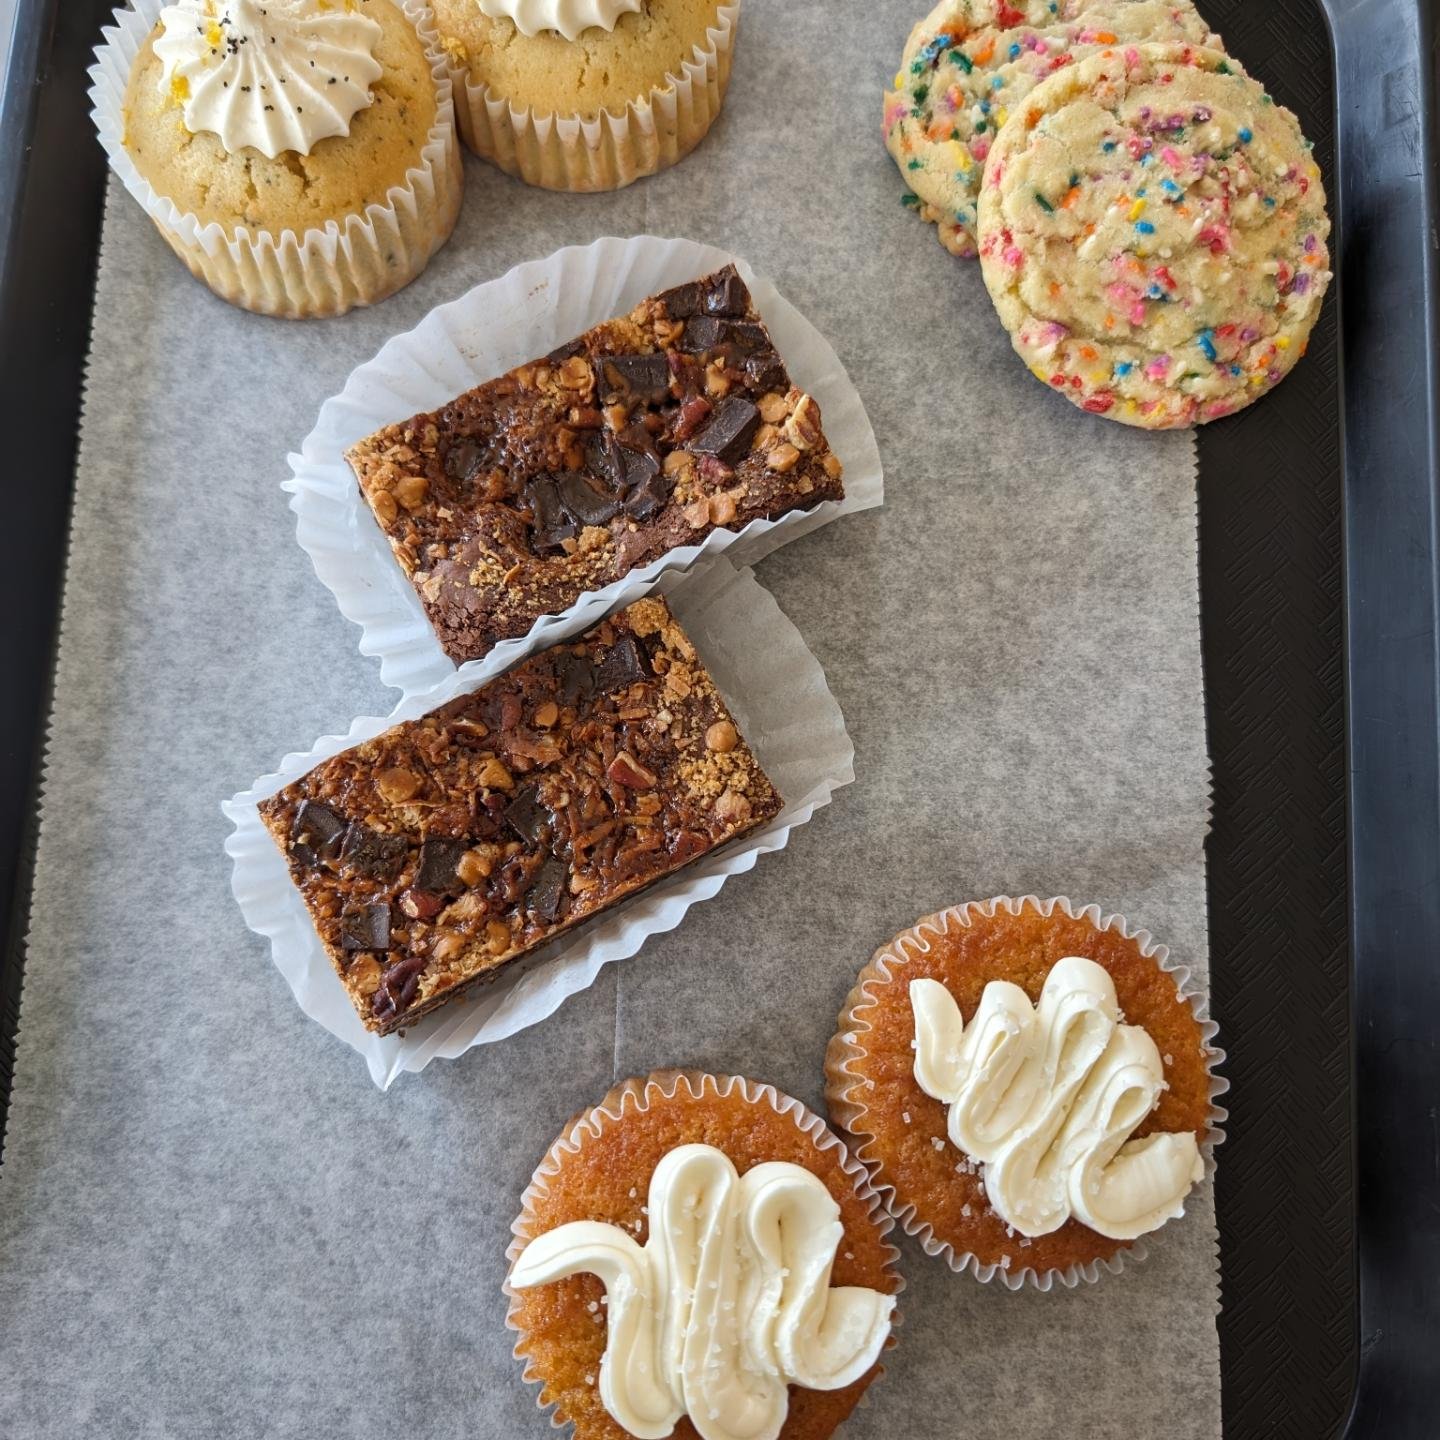 Some new bakery options this week, here's what we've got.
COOKIES - salty chocolate chip, brown butter, butter pecan, peanut butter, sprinkle cookie! *Butter Pecan is running low*

Creamery cookie cake slices always available now! Need a whole one fo